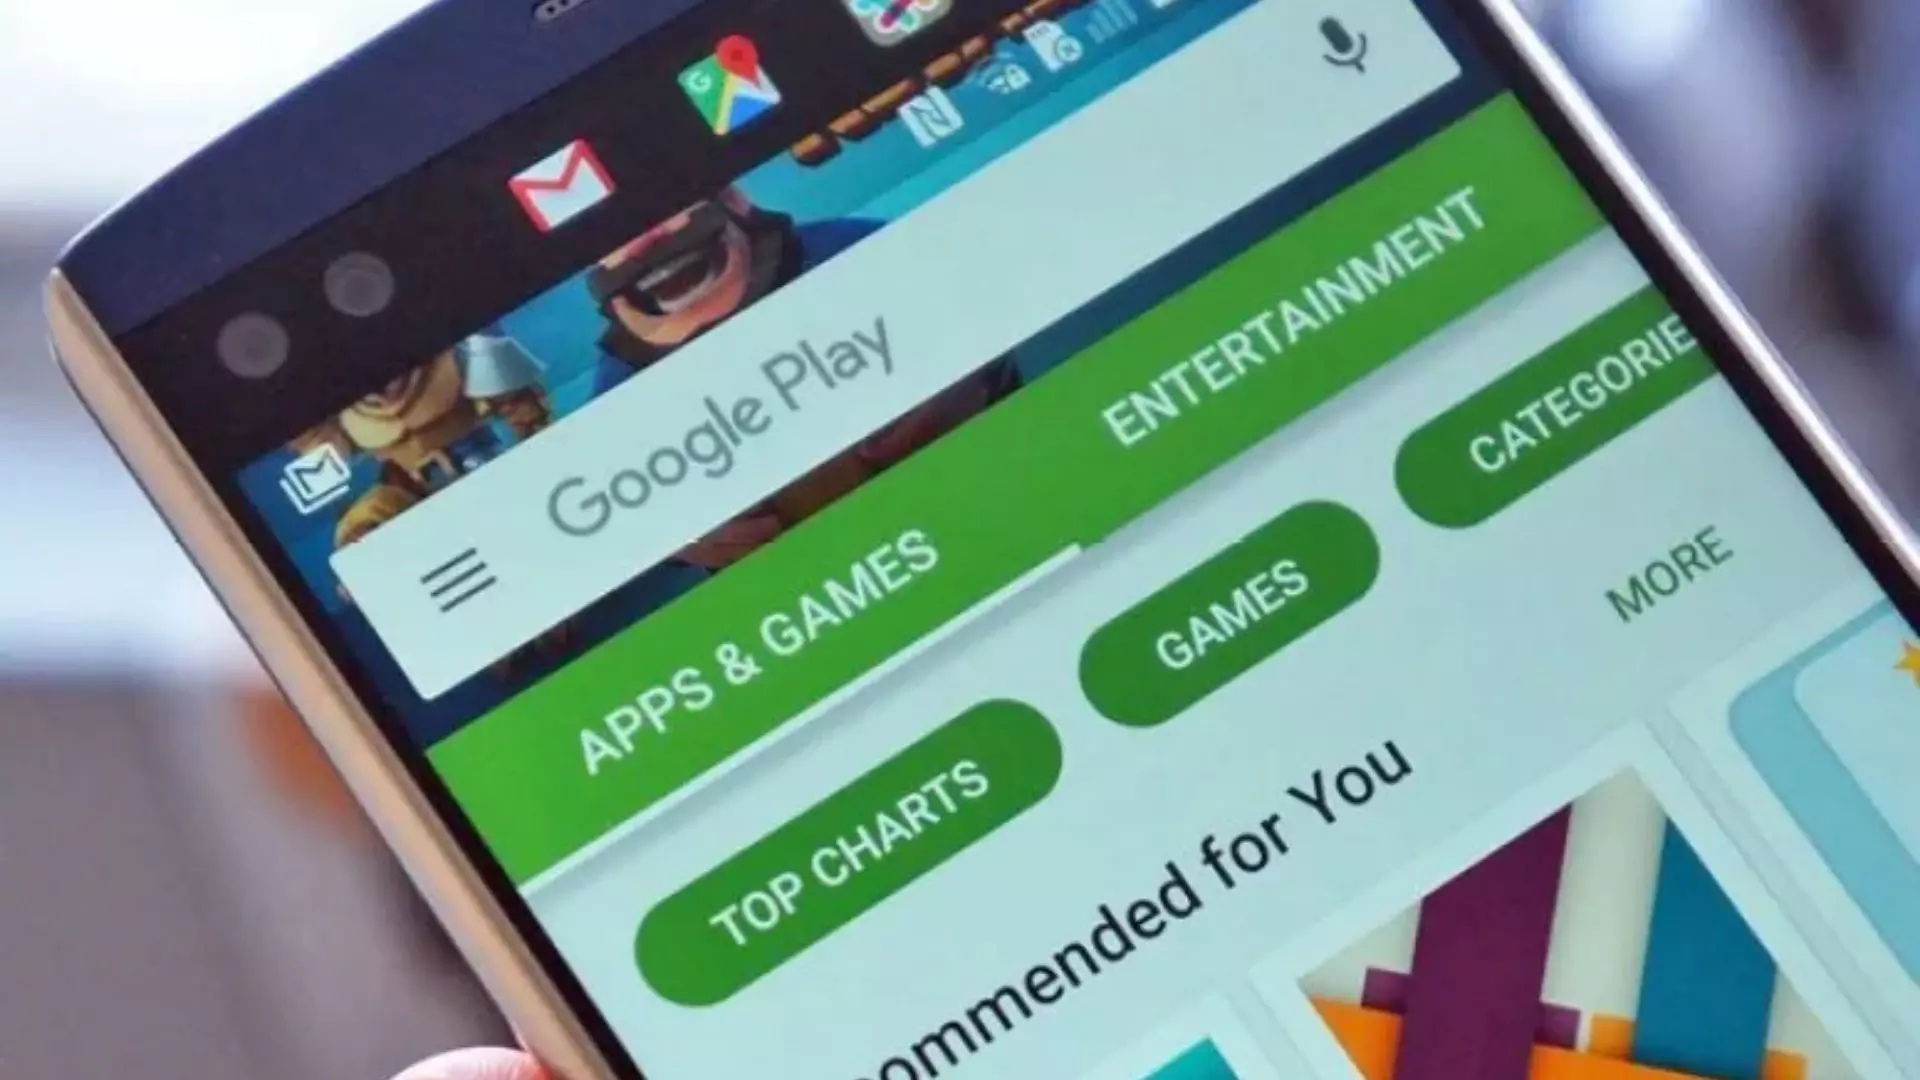 Google Banned Three Applications From Google Play Store